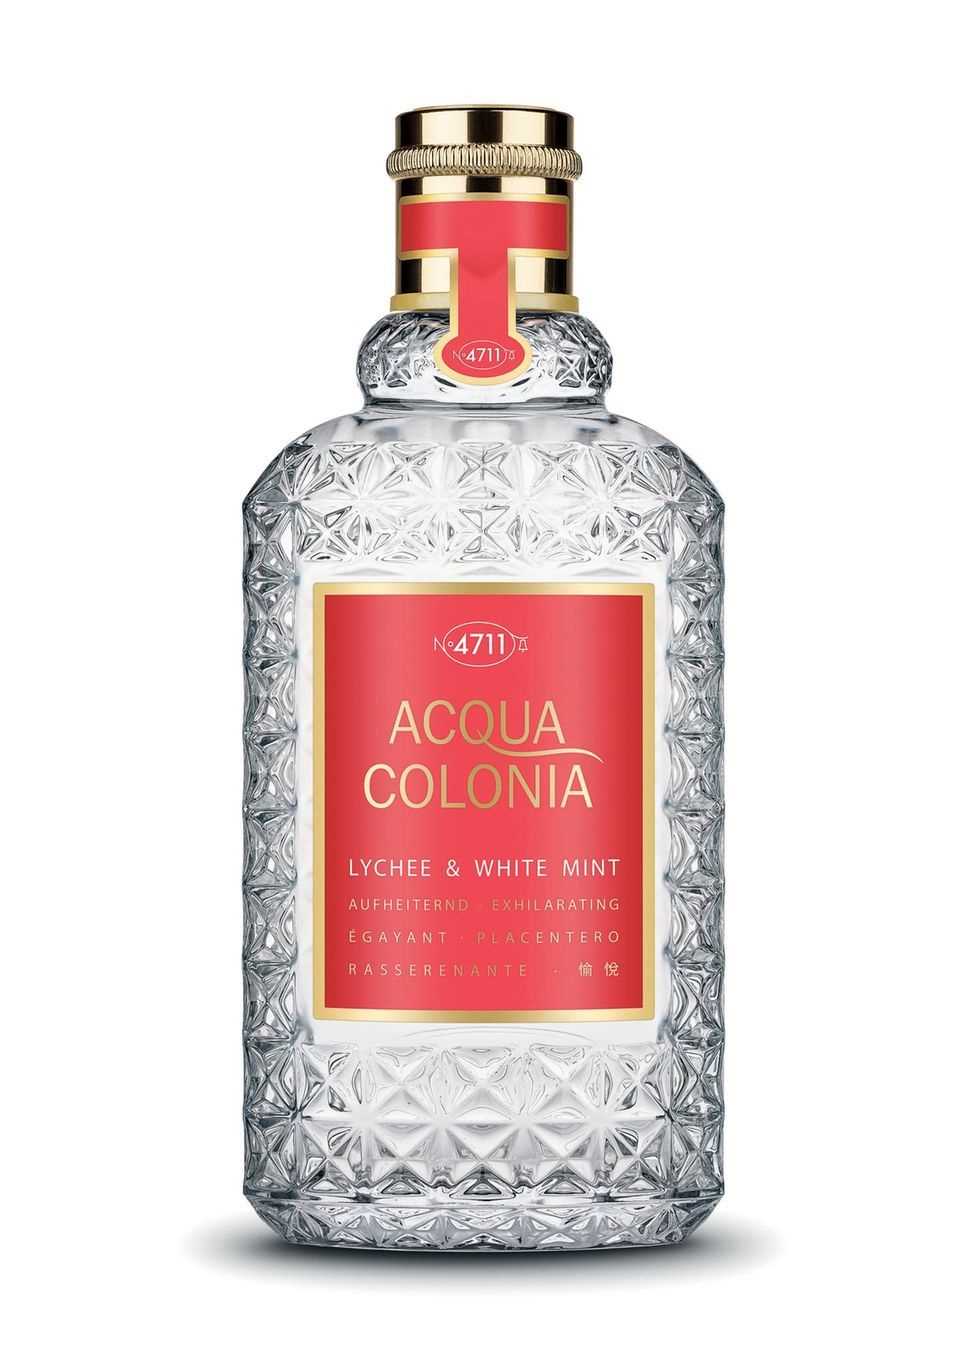 `` Lychee & White Mint '' by 4711 Acqua Colonia